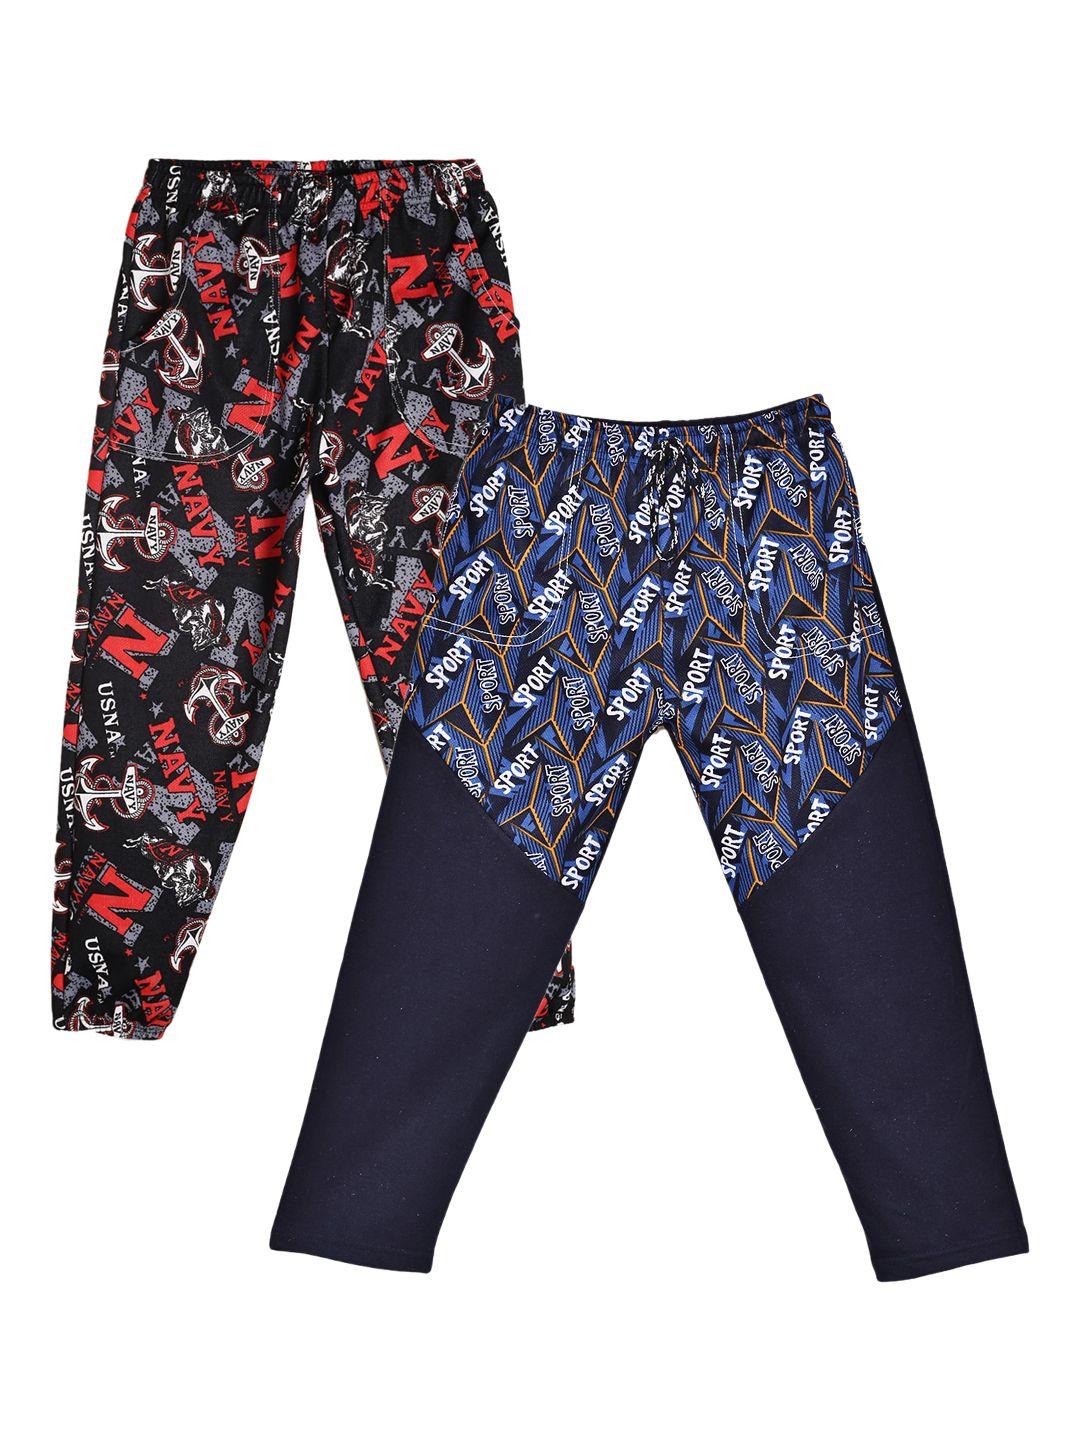 fashionable boys pack of 2 multi-colored printed track pants